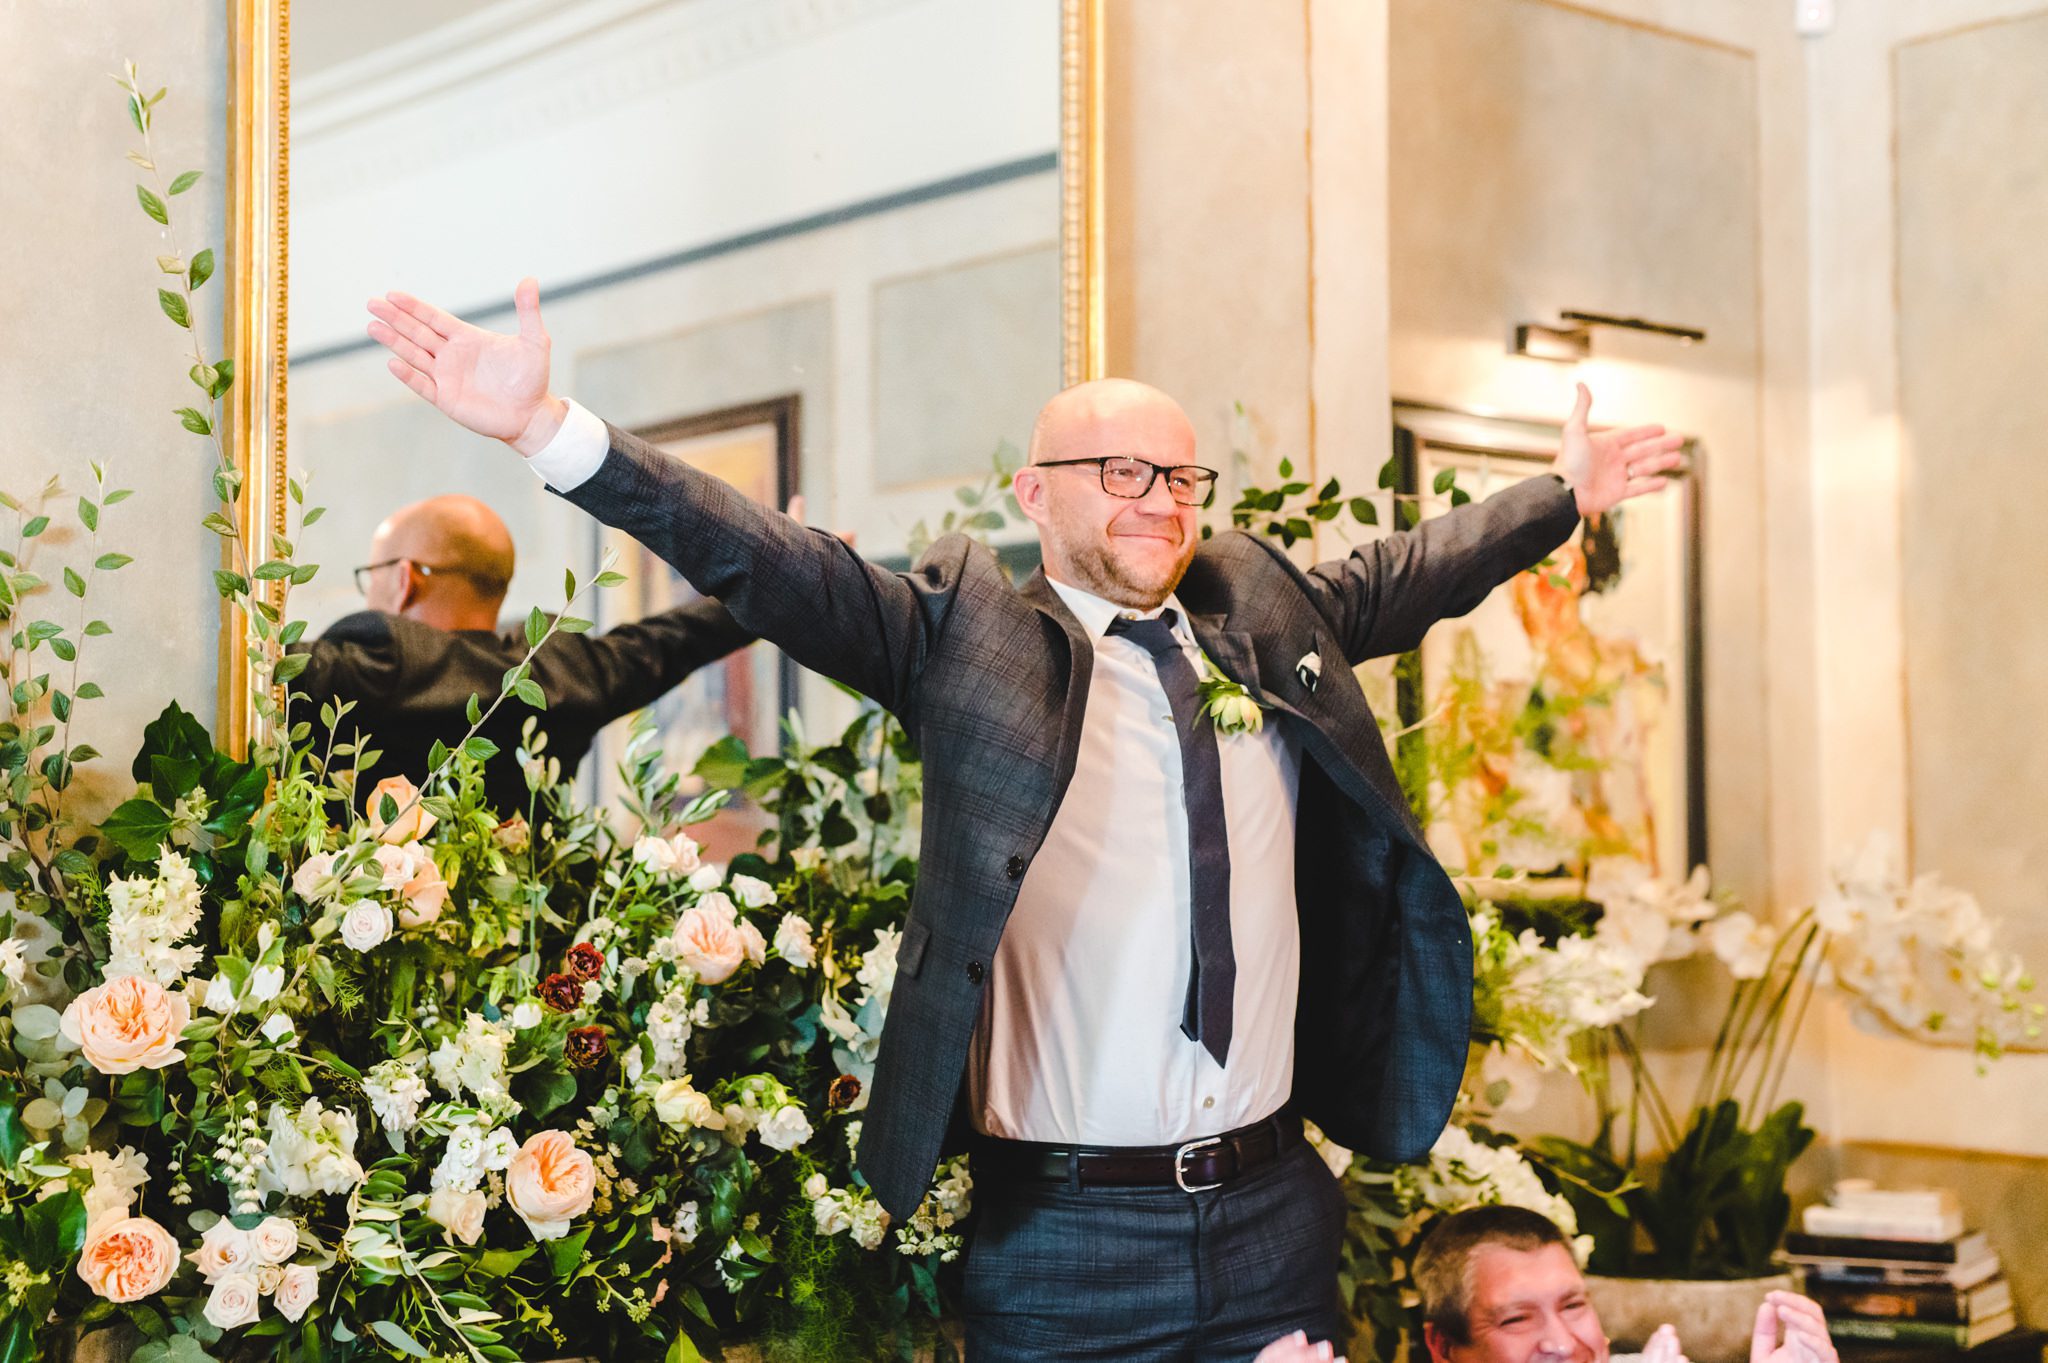 A groom standing up with his arms out